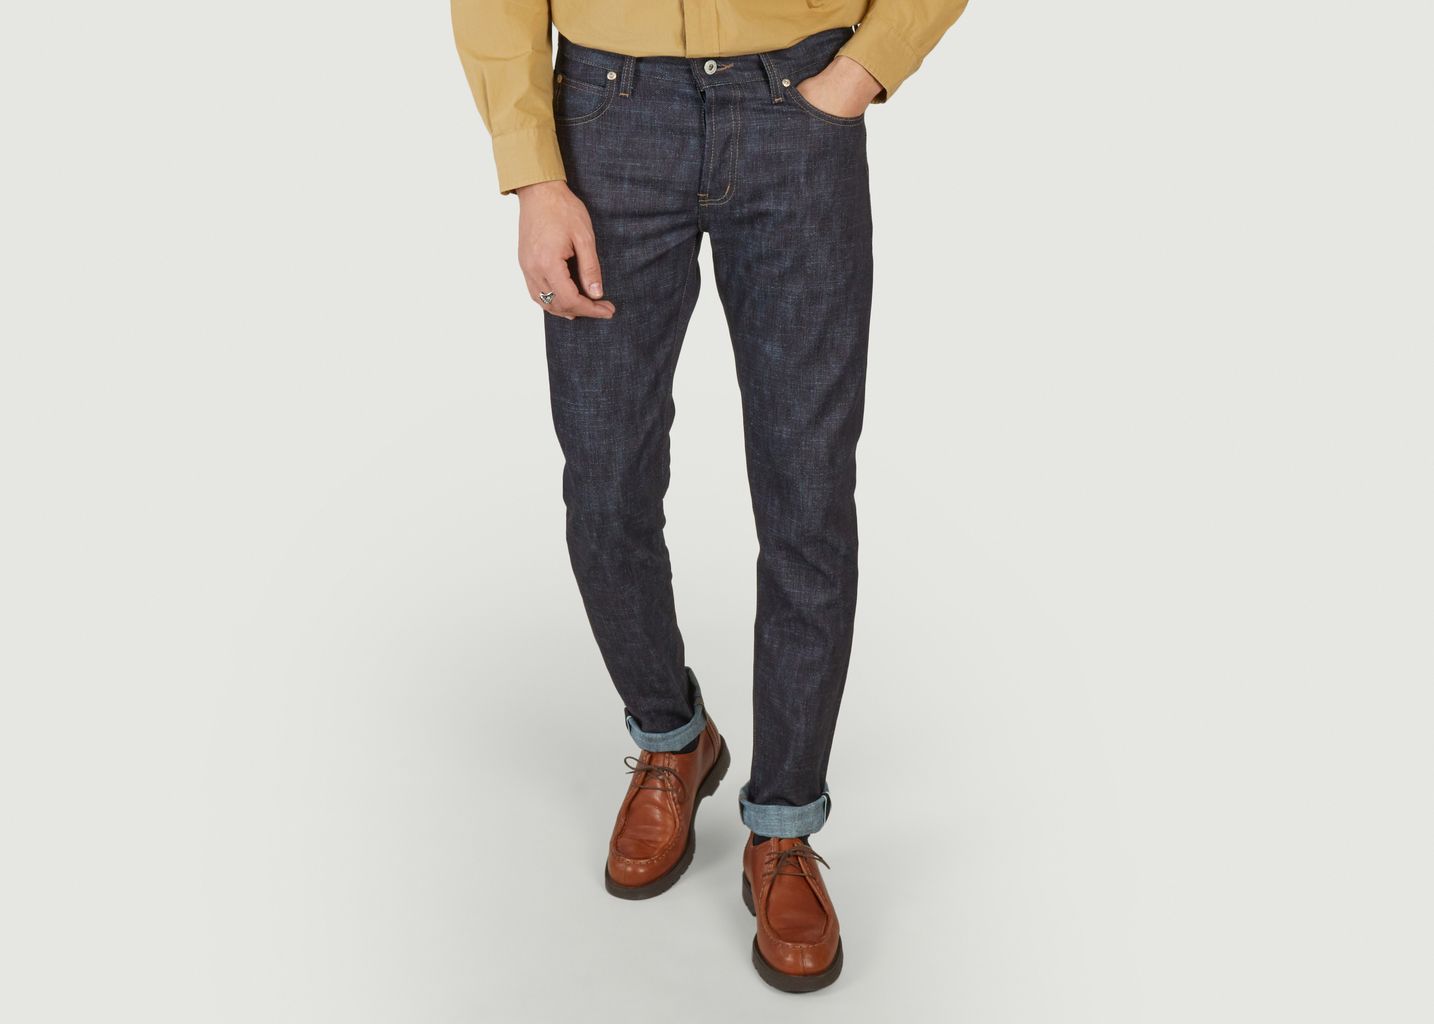 Jean Super Guy Broken Twill - Naked and Famous